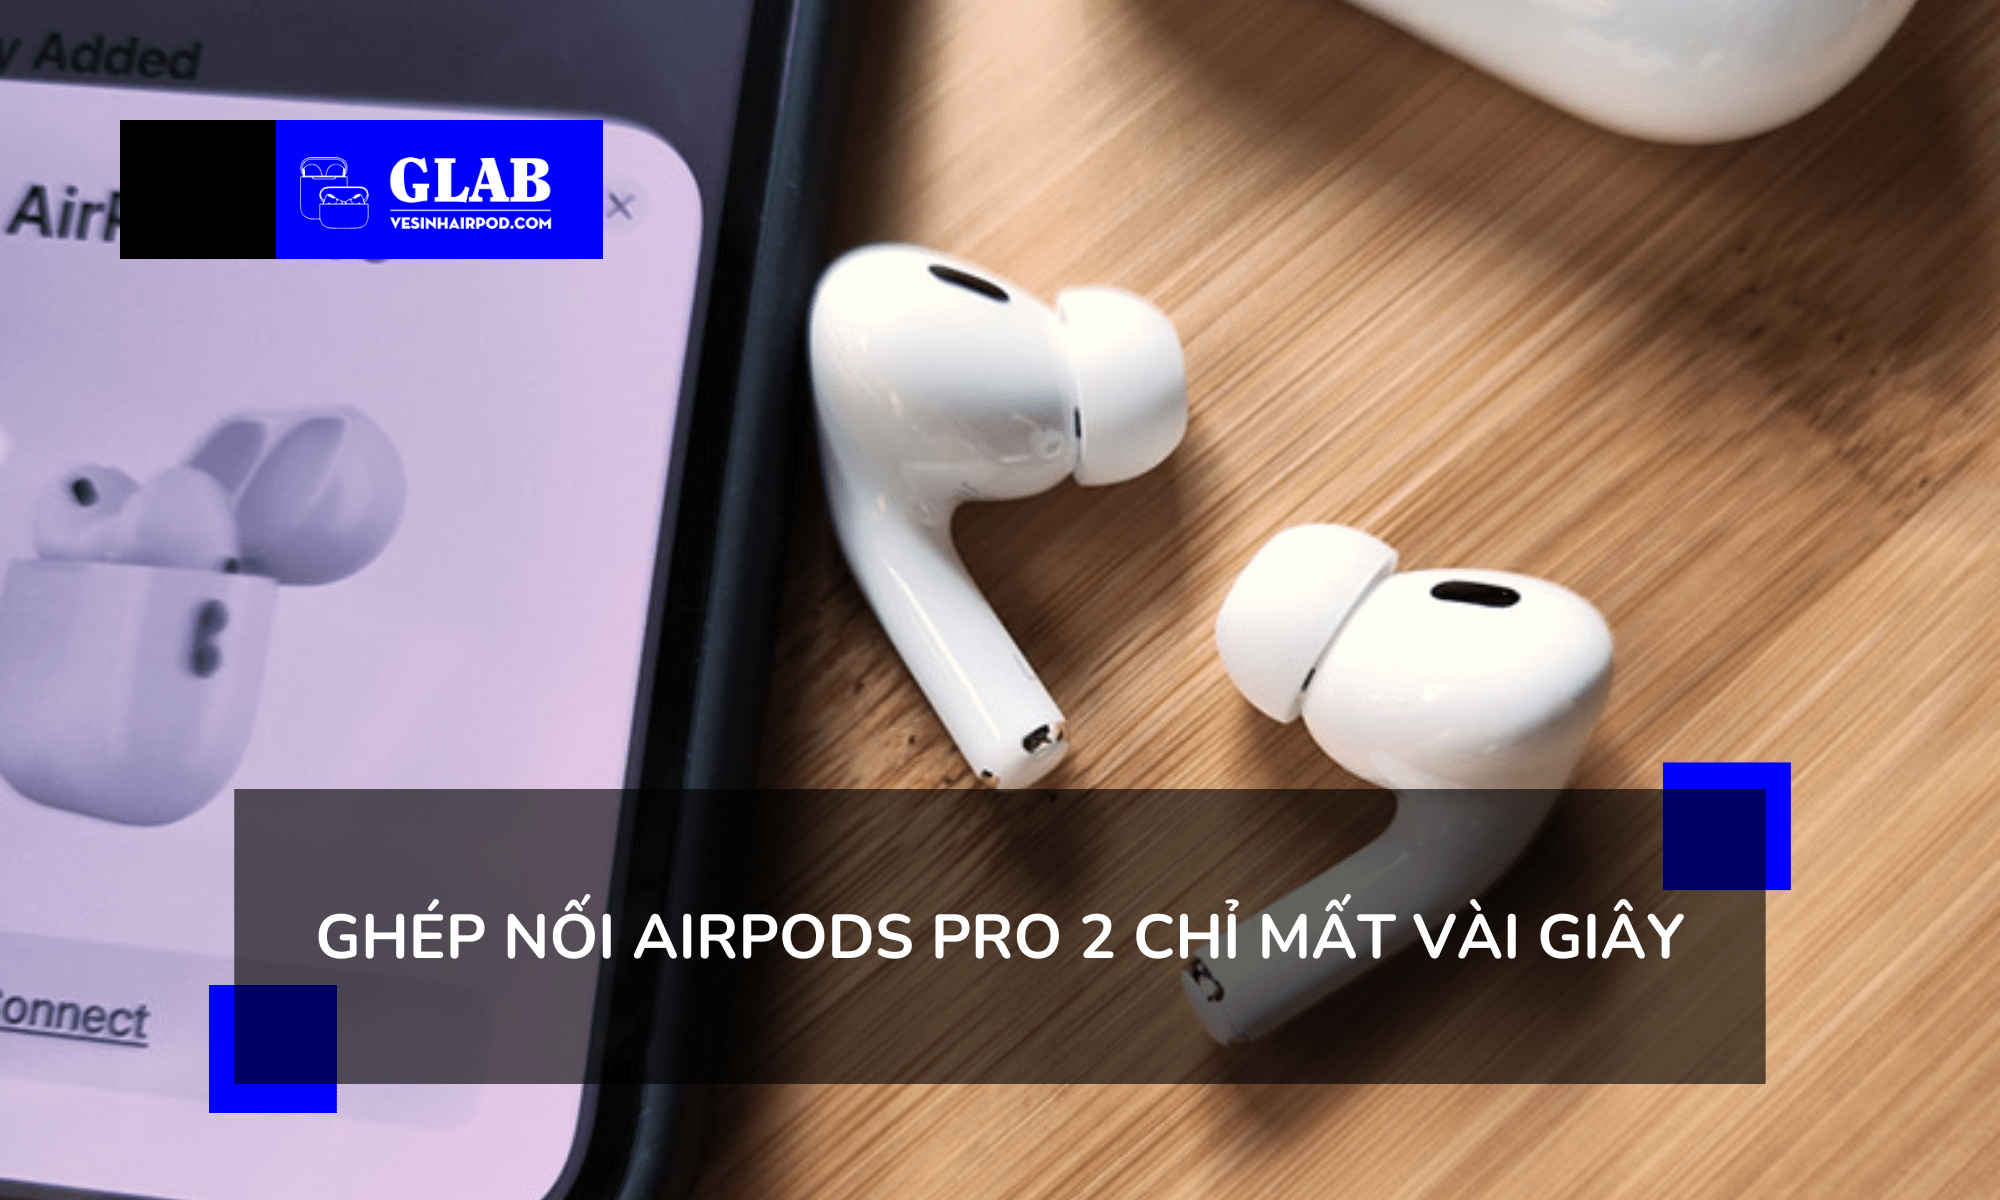 cach-su-dung-airpods-pro-2